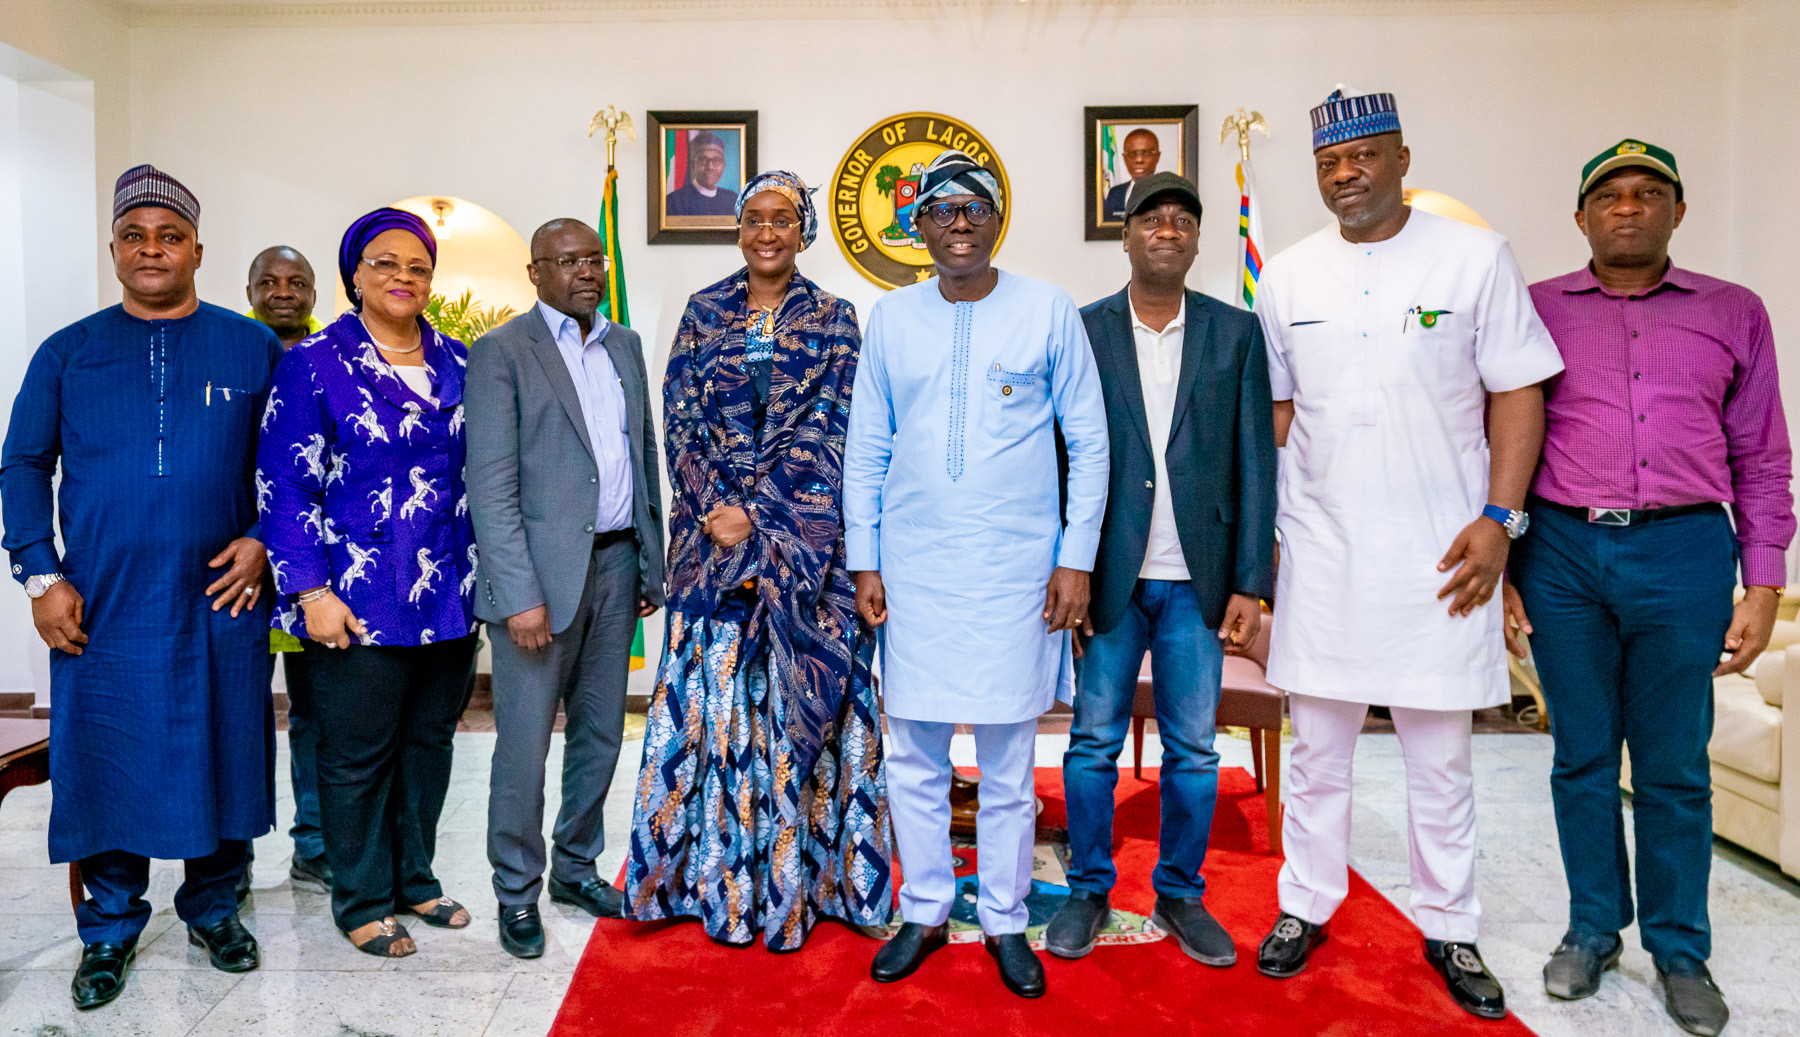 PHOTO NEWS: ABULE-ADO EXPLOSION COMMISERATION VISIT BY THE MINISTER OF HUMANITARIAN AFFAIRS, DISASTER MANAGEMENT & SOCIAL DEVELOPMENT TO THE STATE GOVERNMENT AT LAGOS HOUSE, MARINA, WEDNESDAY, MARCH 18, 2020.